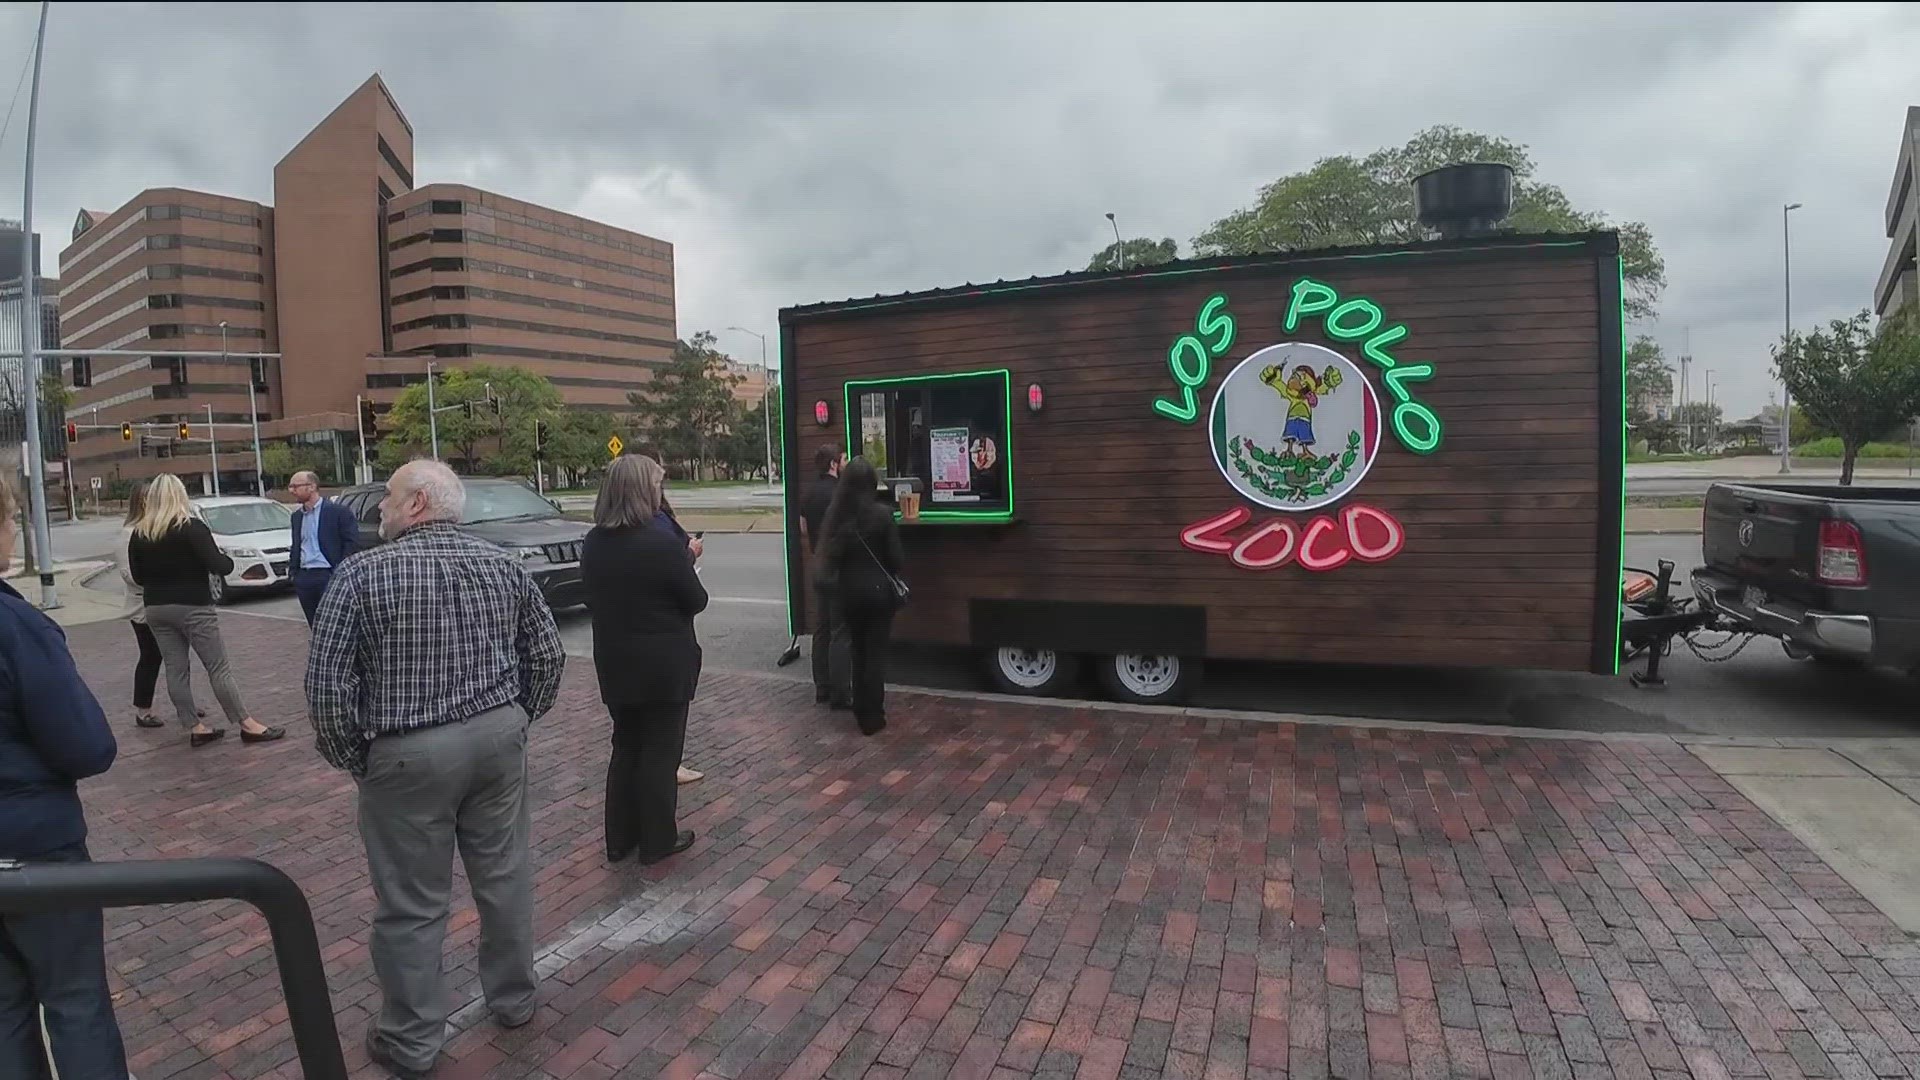 The proposed ordinance would require food trucks to stay 100 feet away from restaurants.